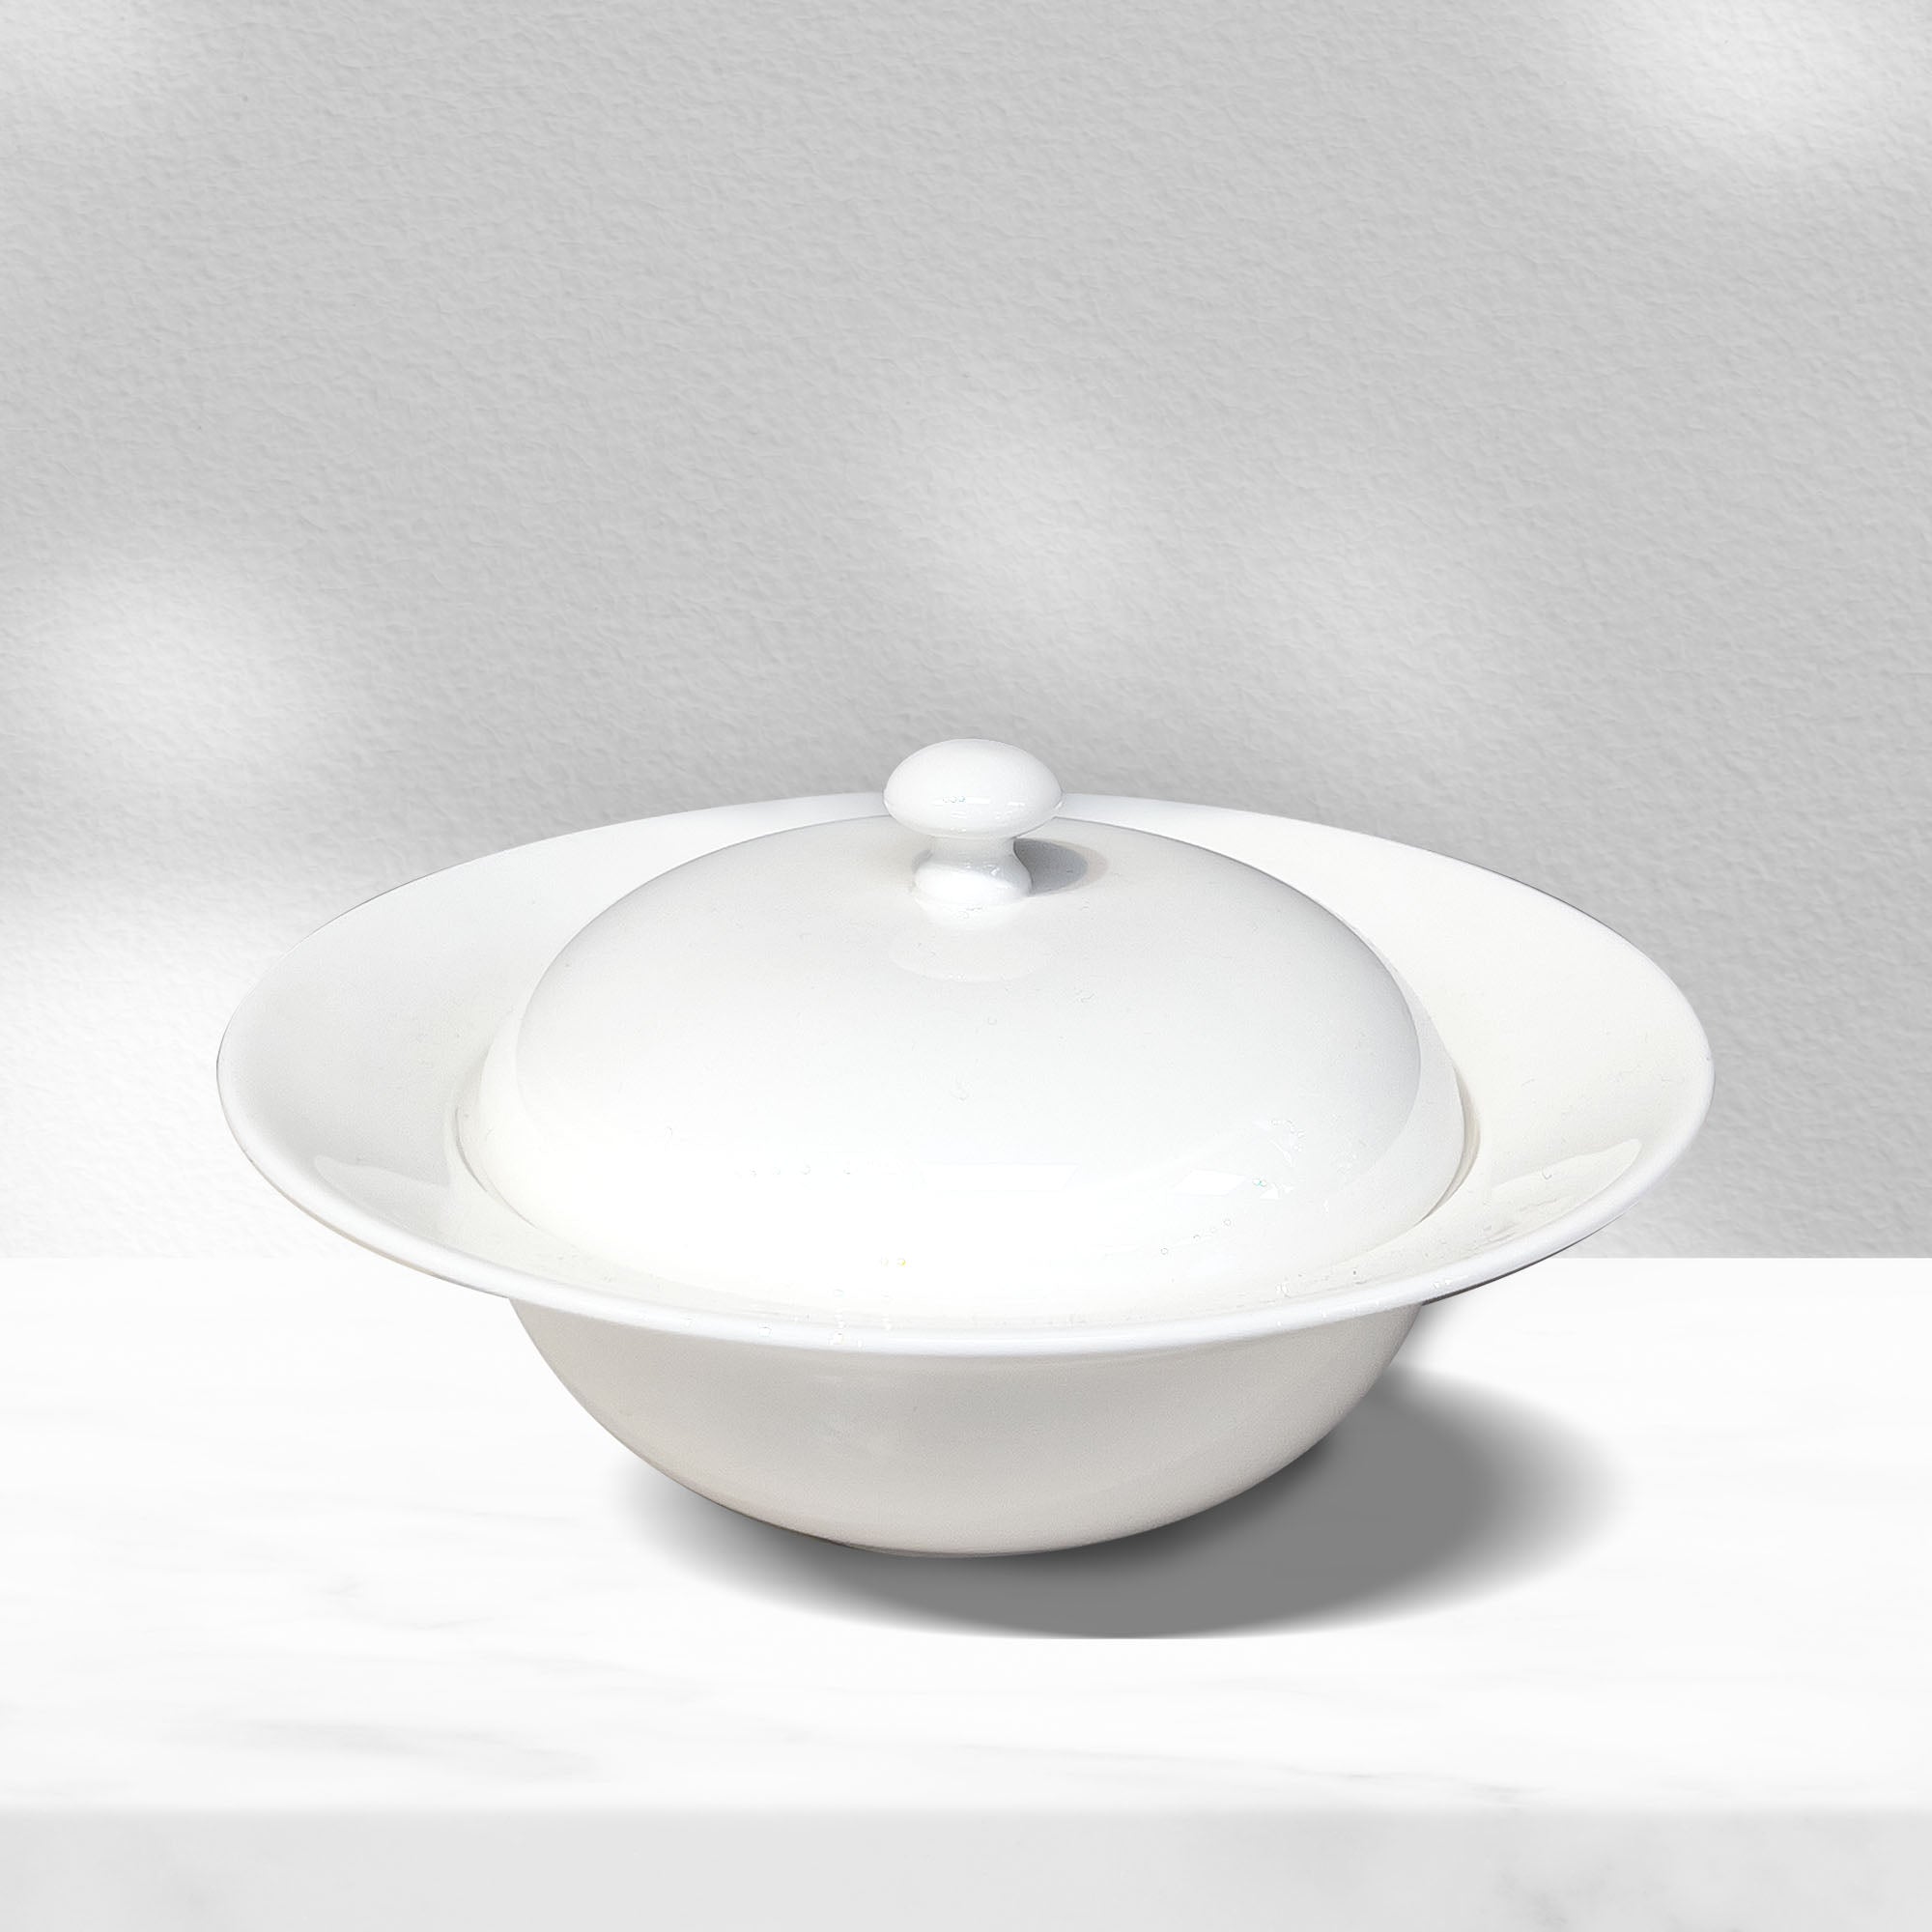 [Mofa] Rim 7" Soup Bowl with lid [BACKORDERED]